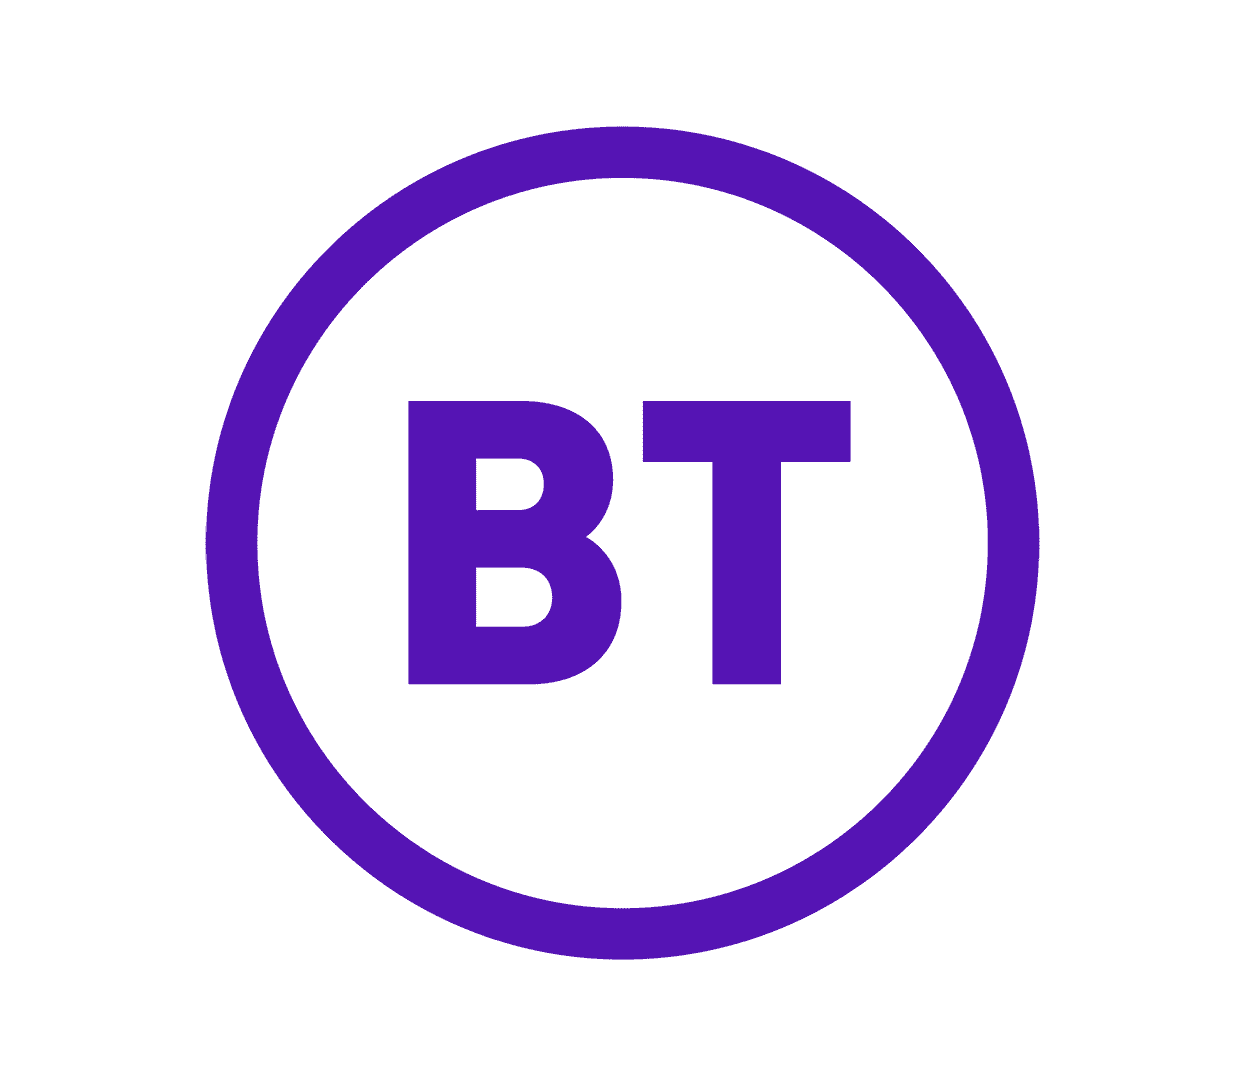 png image of bt logo in purple